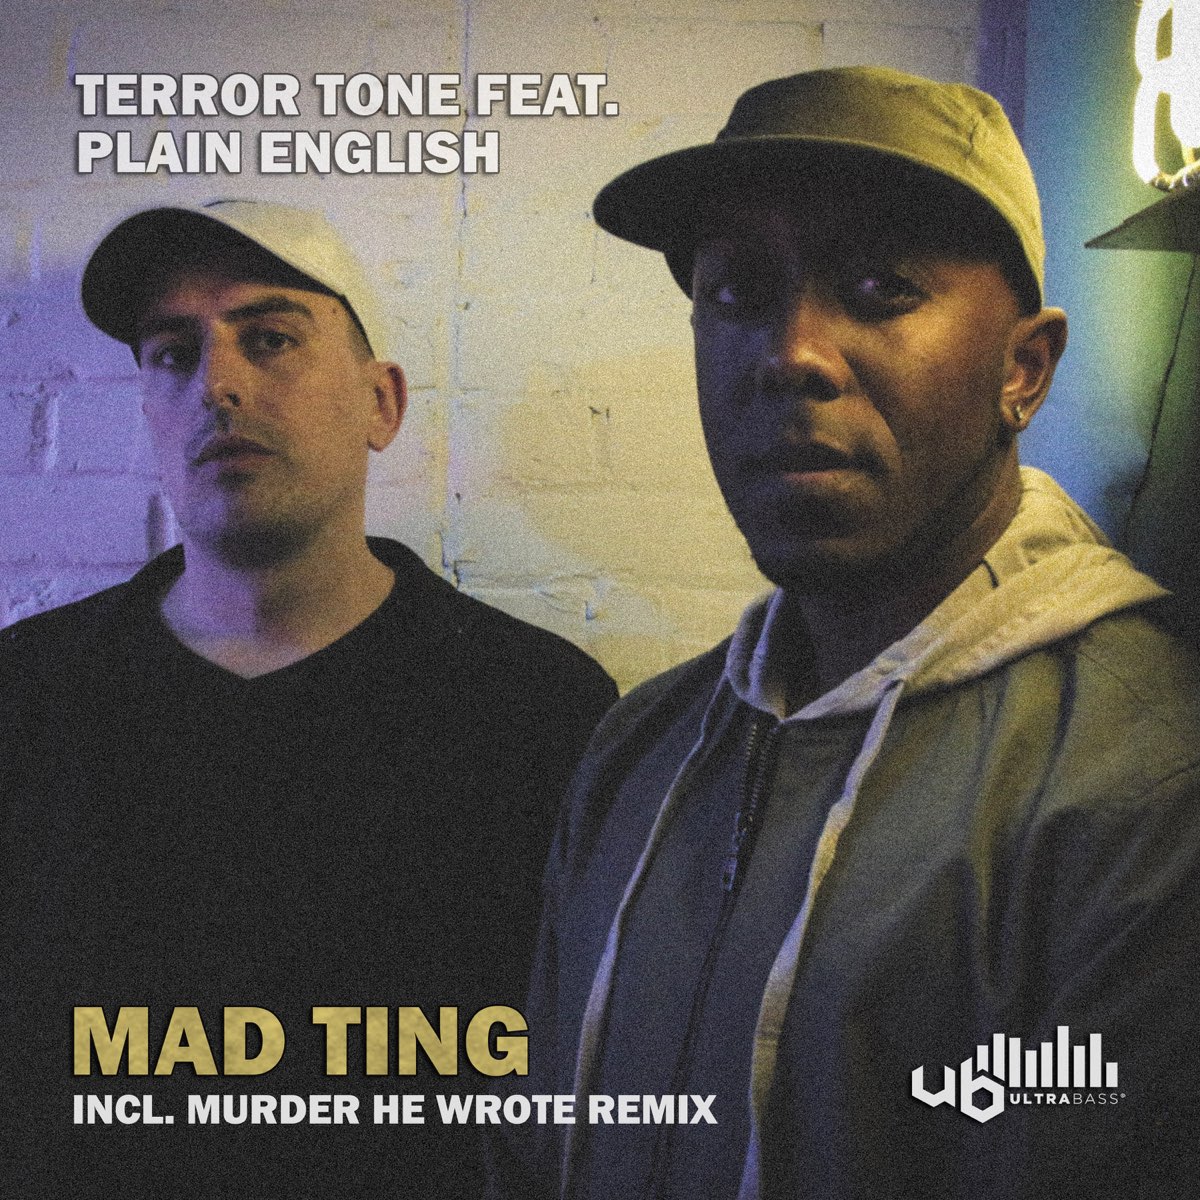 Tone feat. Grime Ting of Terror.